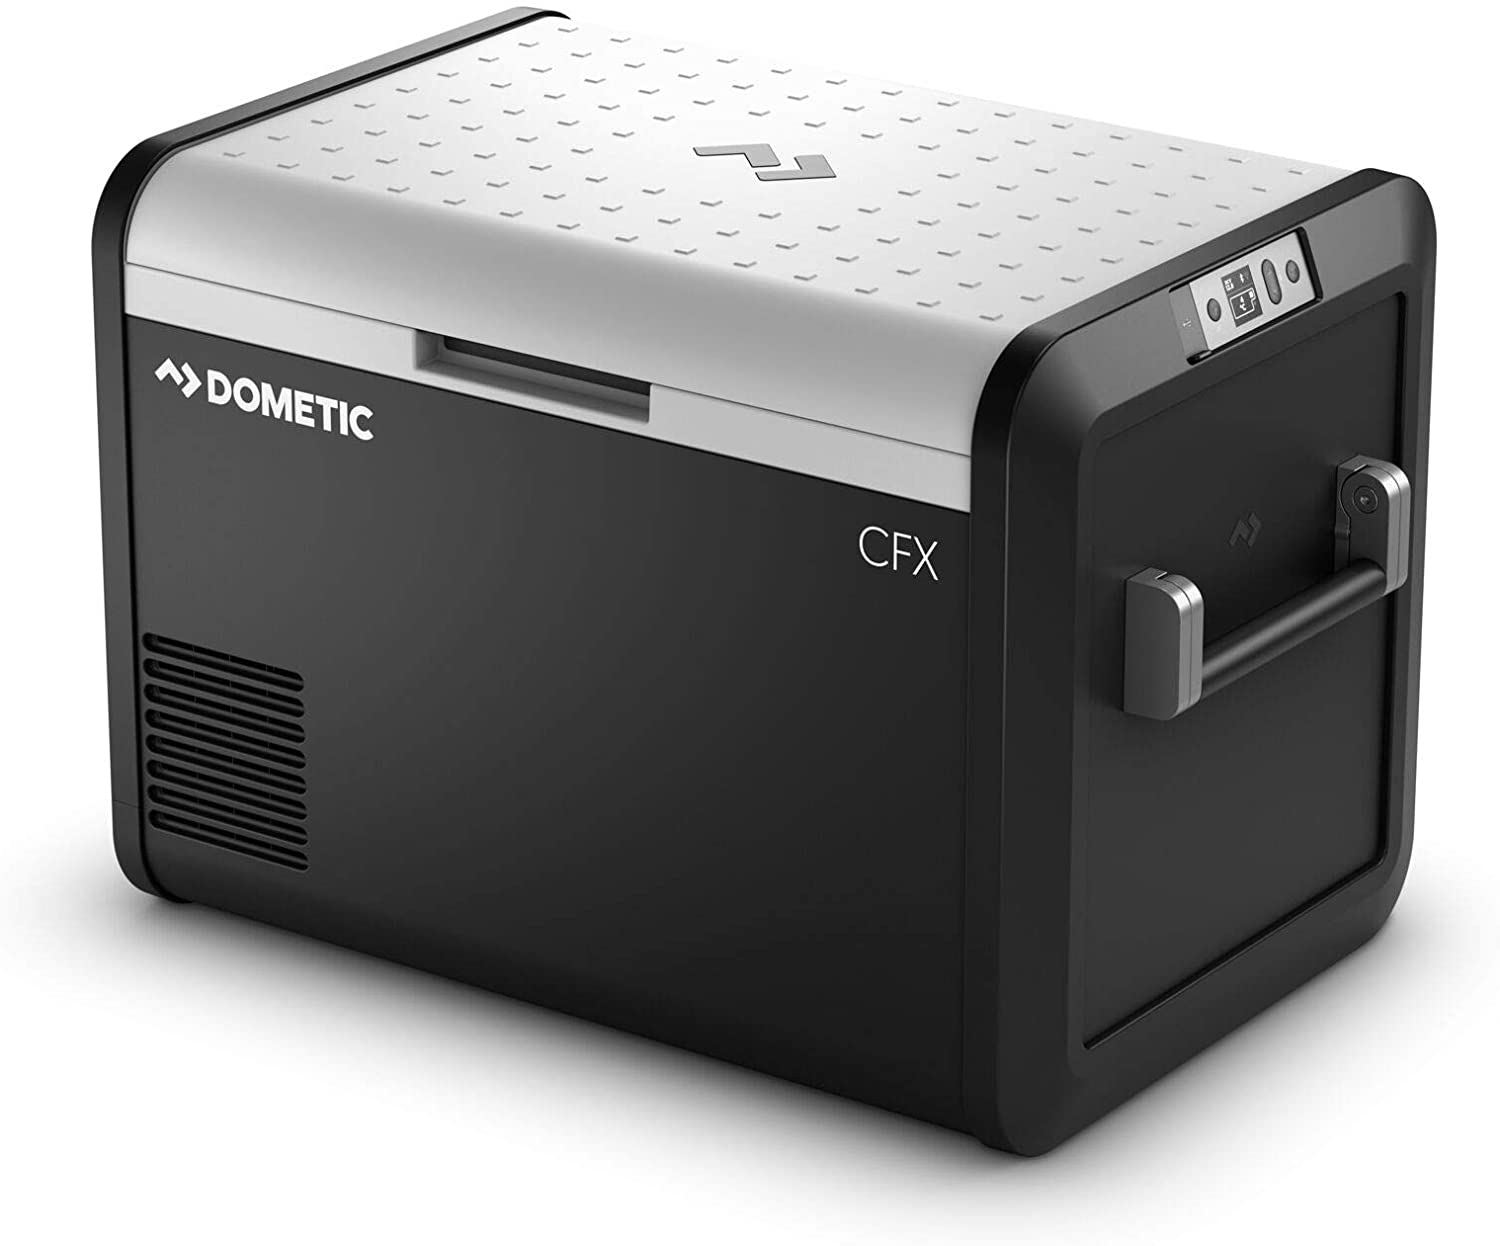 DOMETIC CFX3 55-Liter Portable Refrigerator and Freezer with ICE MAKER, Powered by AC/DC or Solar 55 Liter